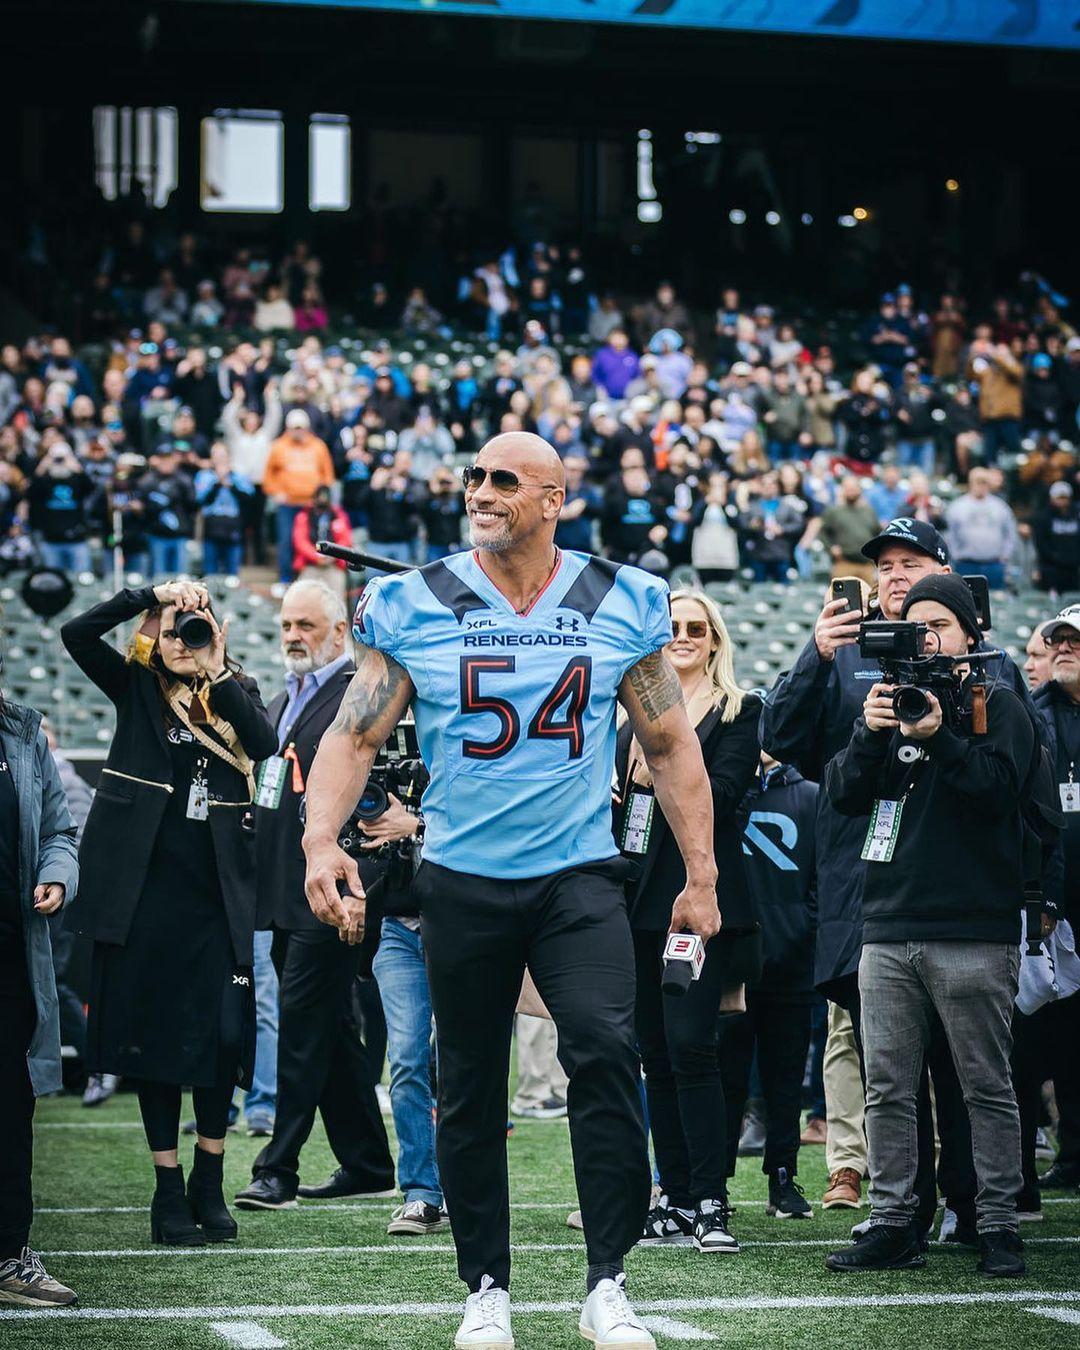 Dwayne Johnson Describes XFL Reopening As Unforgettable And 'Humbling Experience'